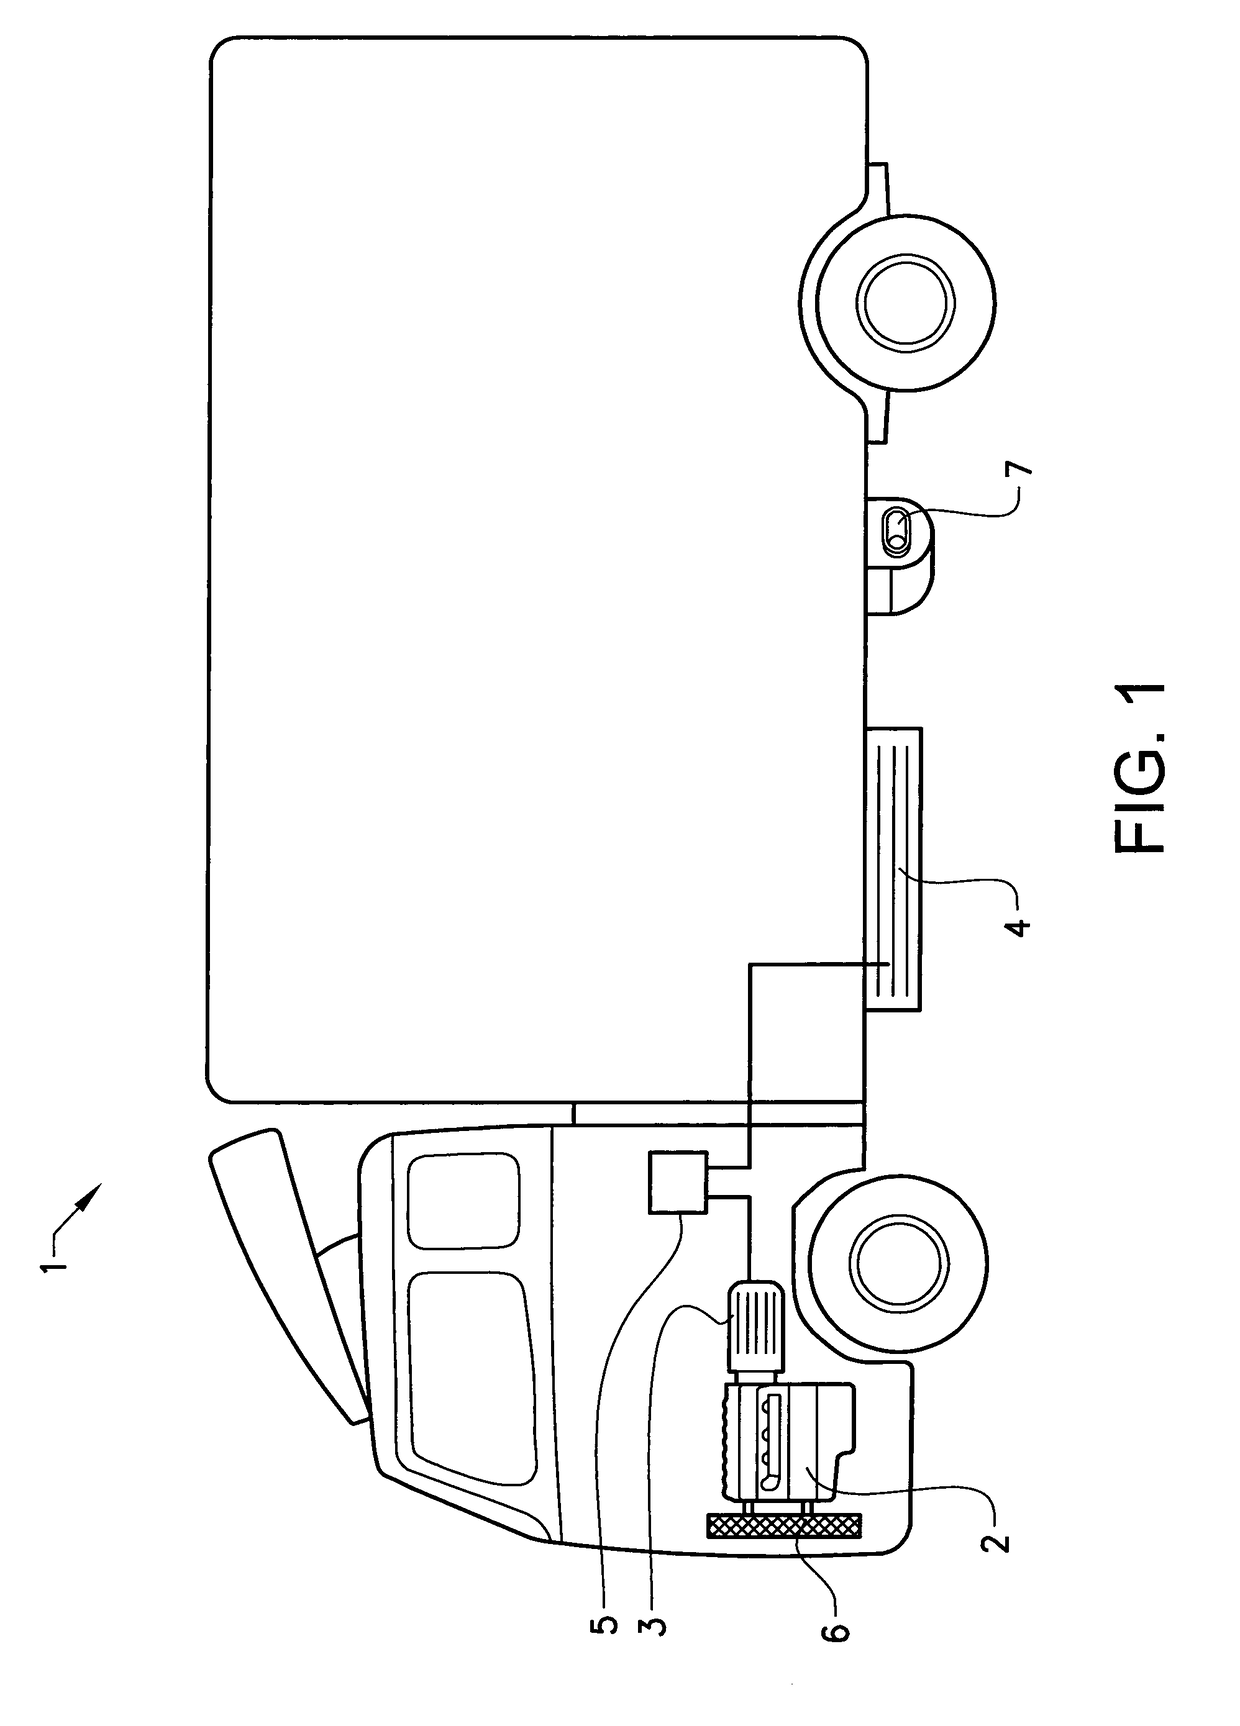 Method for monitoring state of health of a vehicle system